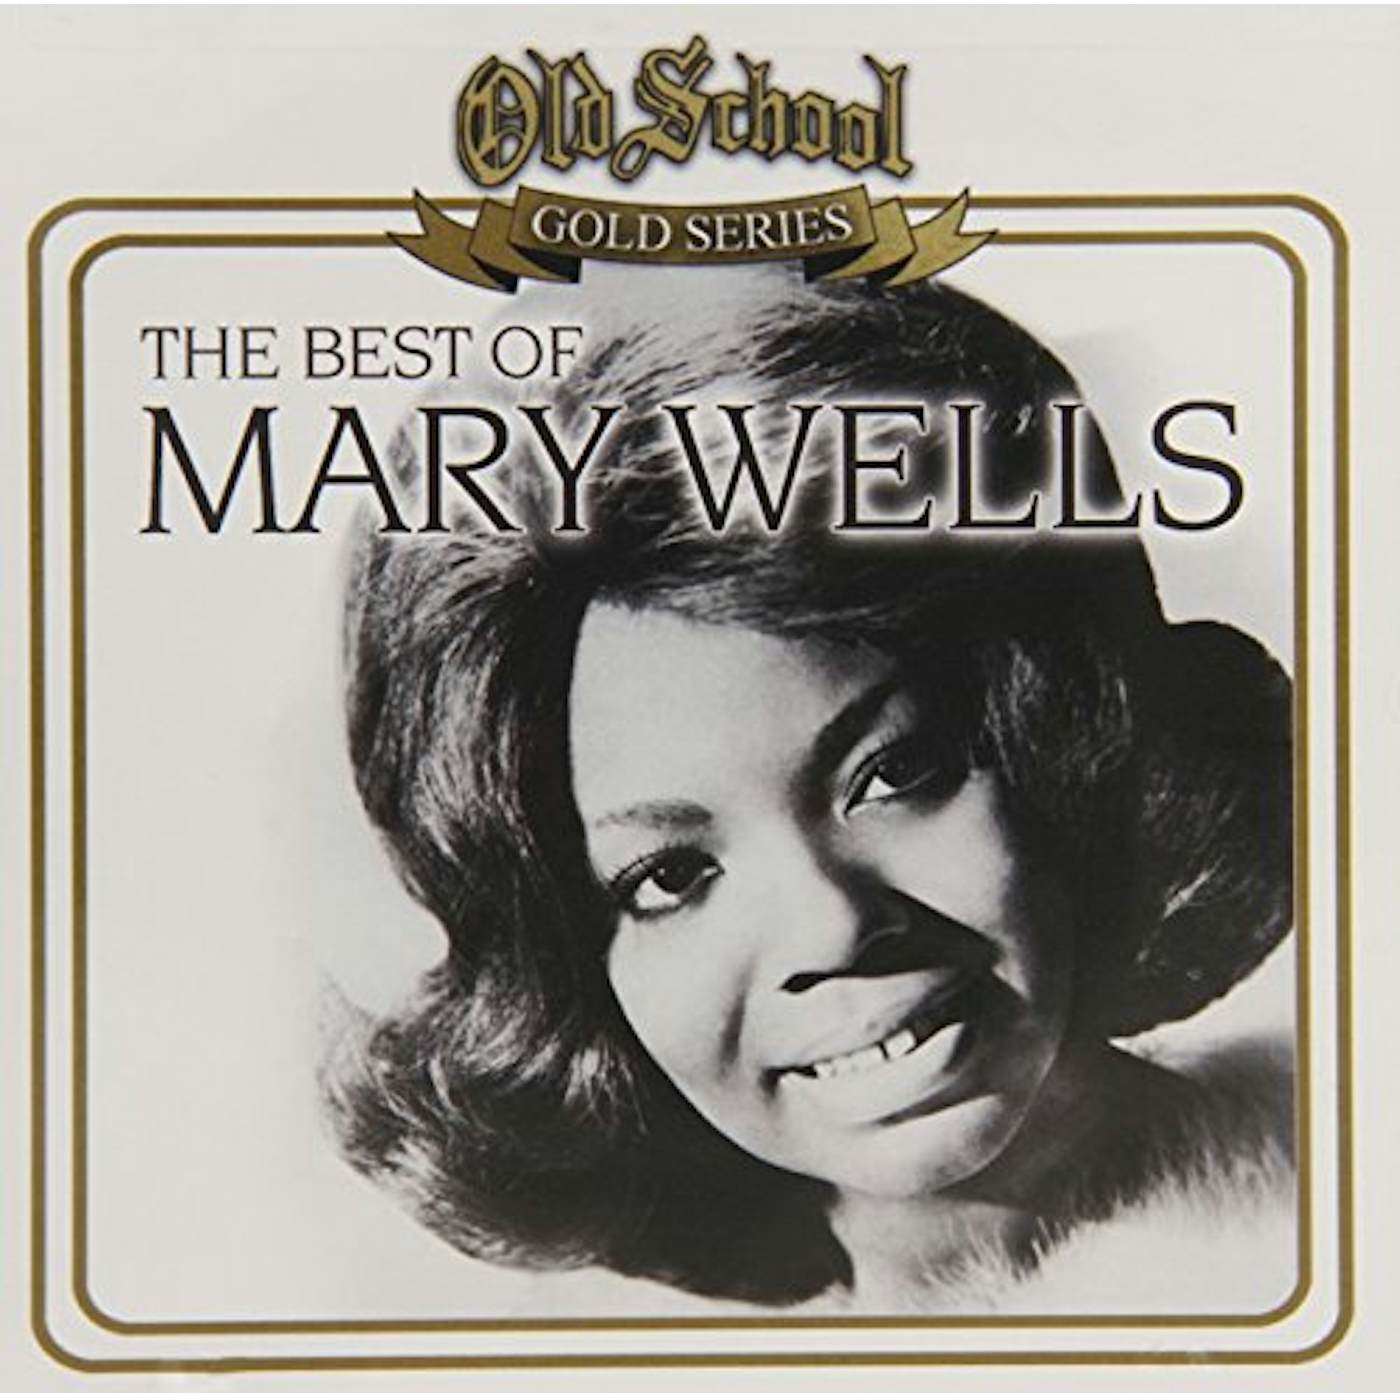 Mary Wells OLD SCHOOL GOLD SERIES CD